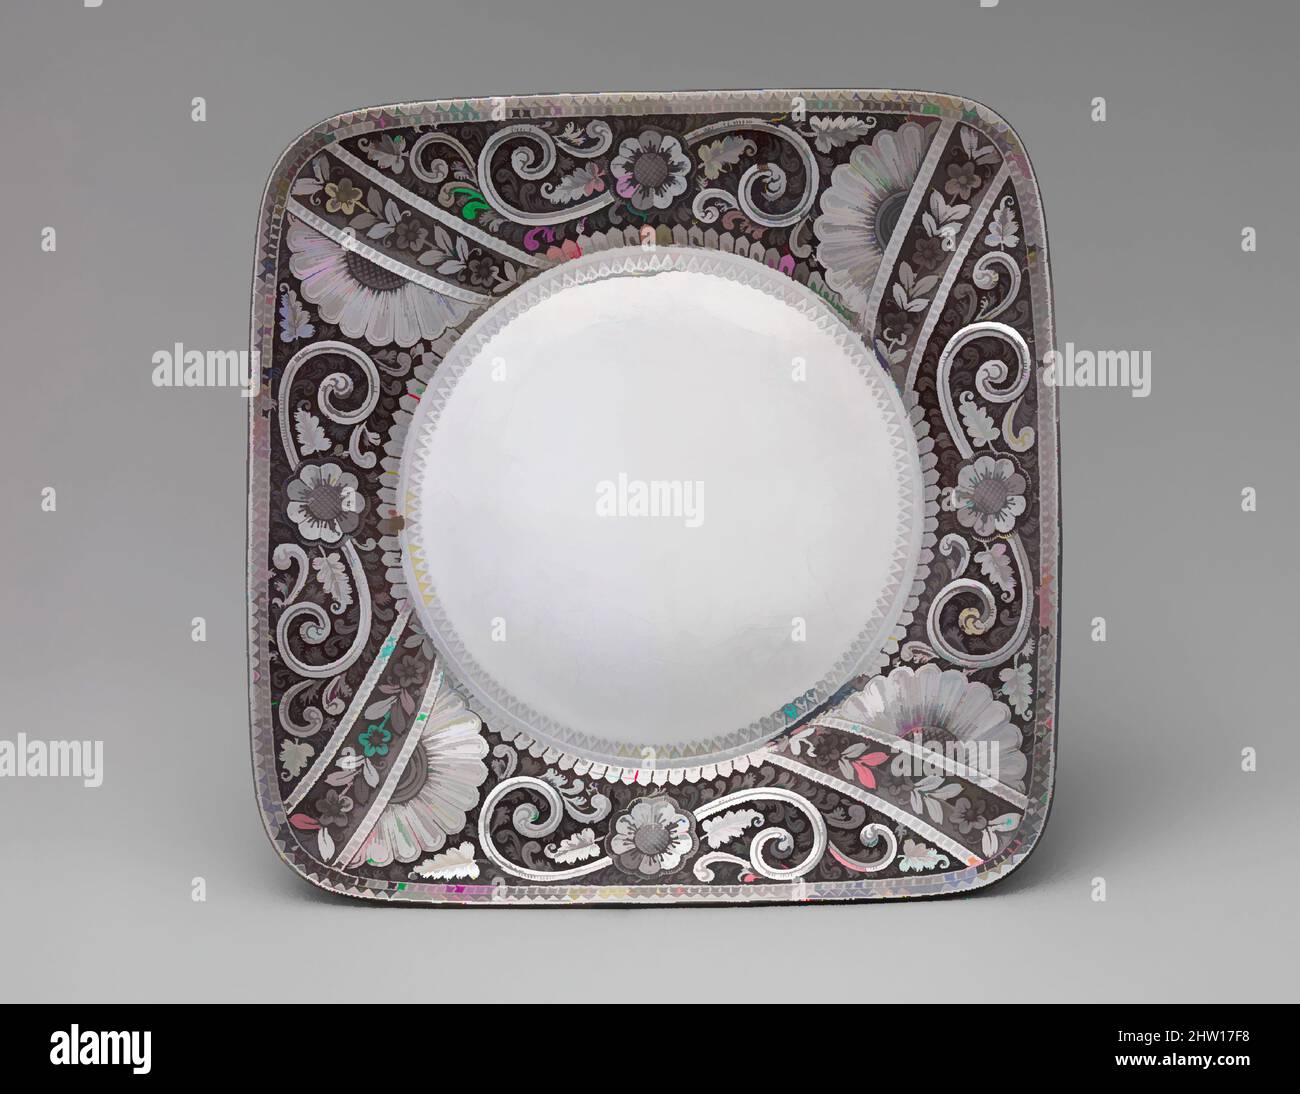 Art inspired by Tray, 1881, Made in Providence, Rhode Island, United States, American, Silver, ivory, 7/8 × 7 7/8 × 7 7/8 in., 10 oz. 19 dwt. (2.2 × 20 × 20 cm, 341.5g), Silver, Made as singular or limited production “specials,” this sinuous coffee pot and tray epitomize the eclectic, Classic works modernized by Artotop with a splash of modernity. Shapes, color and value, eye-catching visual impact on art. Emotions through freedom of artworks in a contemporary way. A timeless message pursuing a wildly creative new direction. Artists turning to the digital medium and creating the Artotop NFT Stock Photo